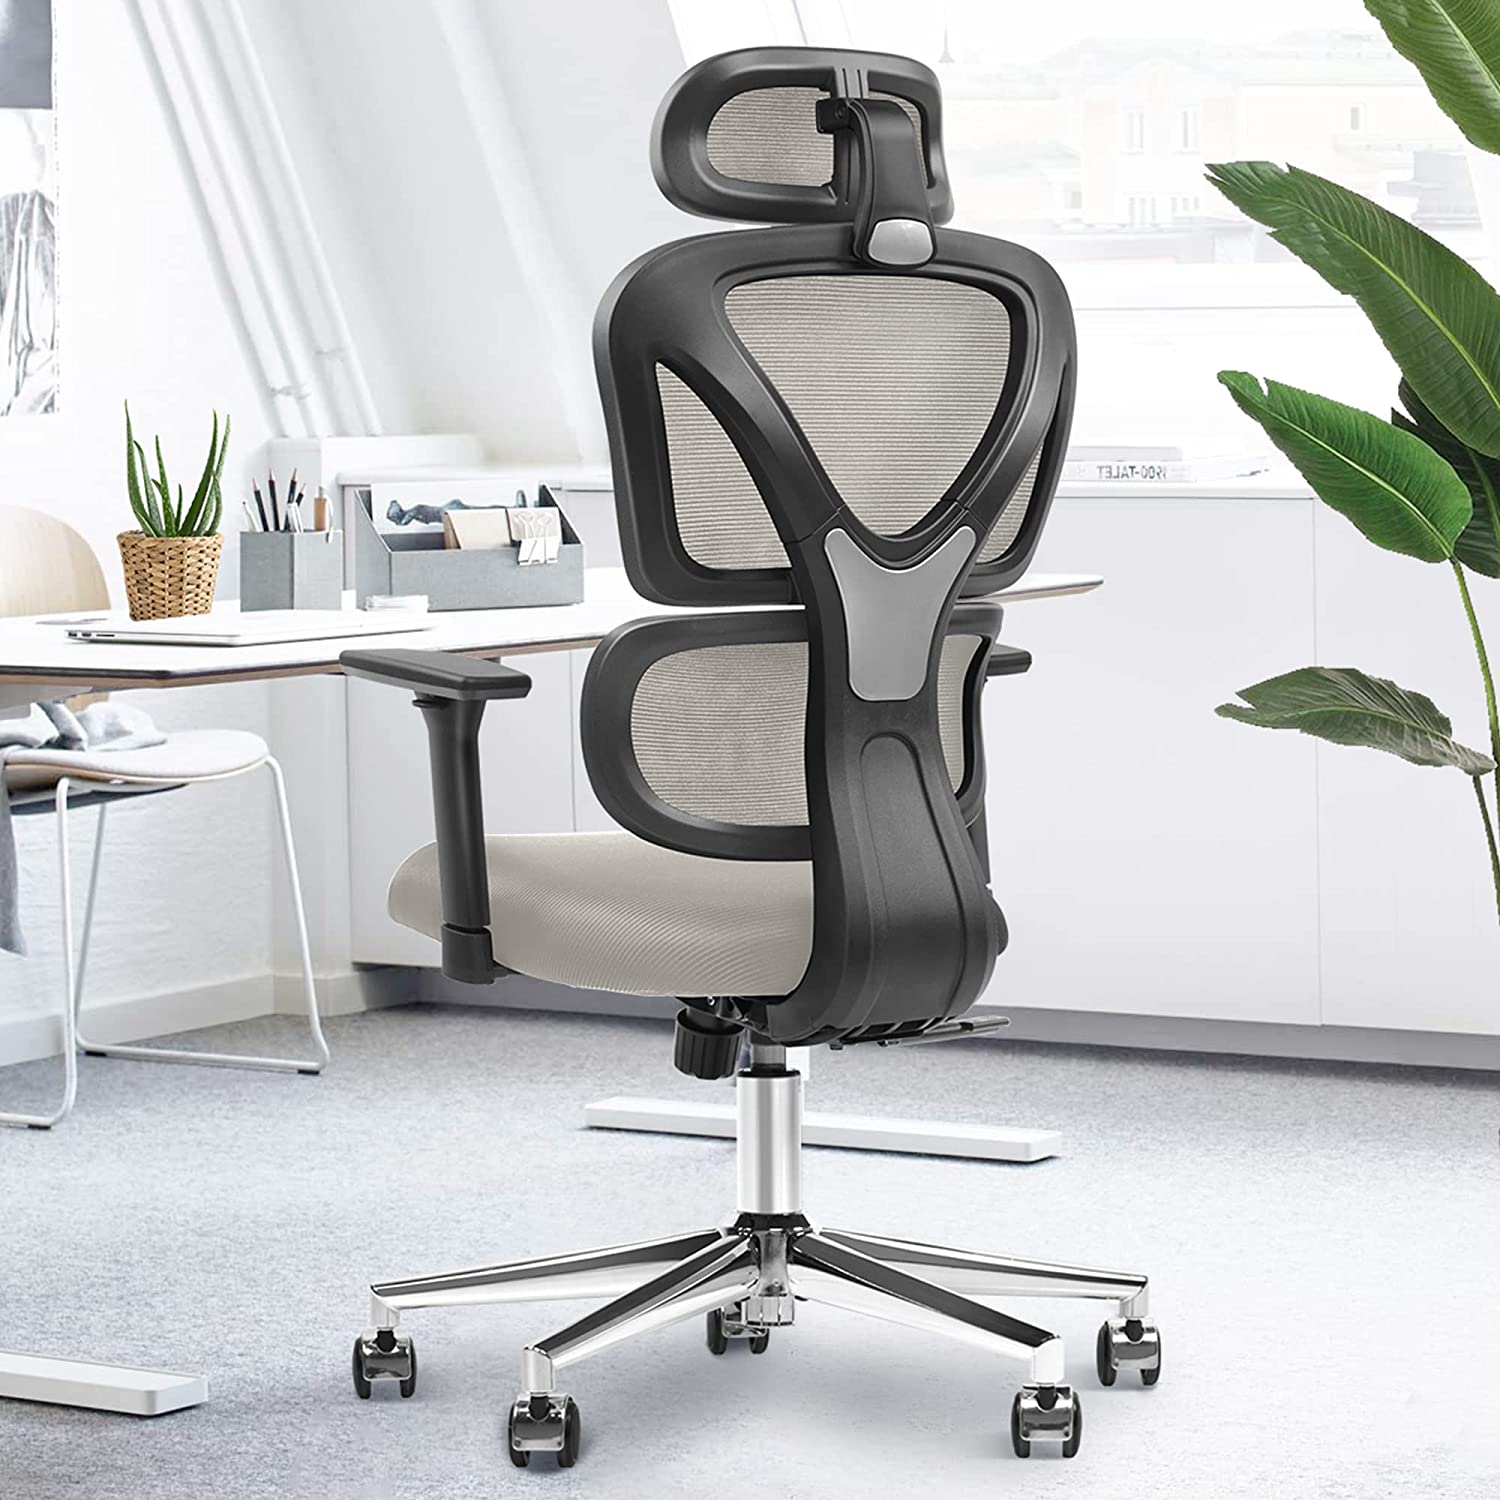 Home Office Rolling Swivel Chair Mesh High Back Desk Chair with 3D Armrest & Lumbar Support Featured Image